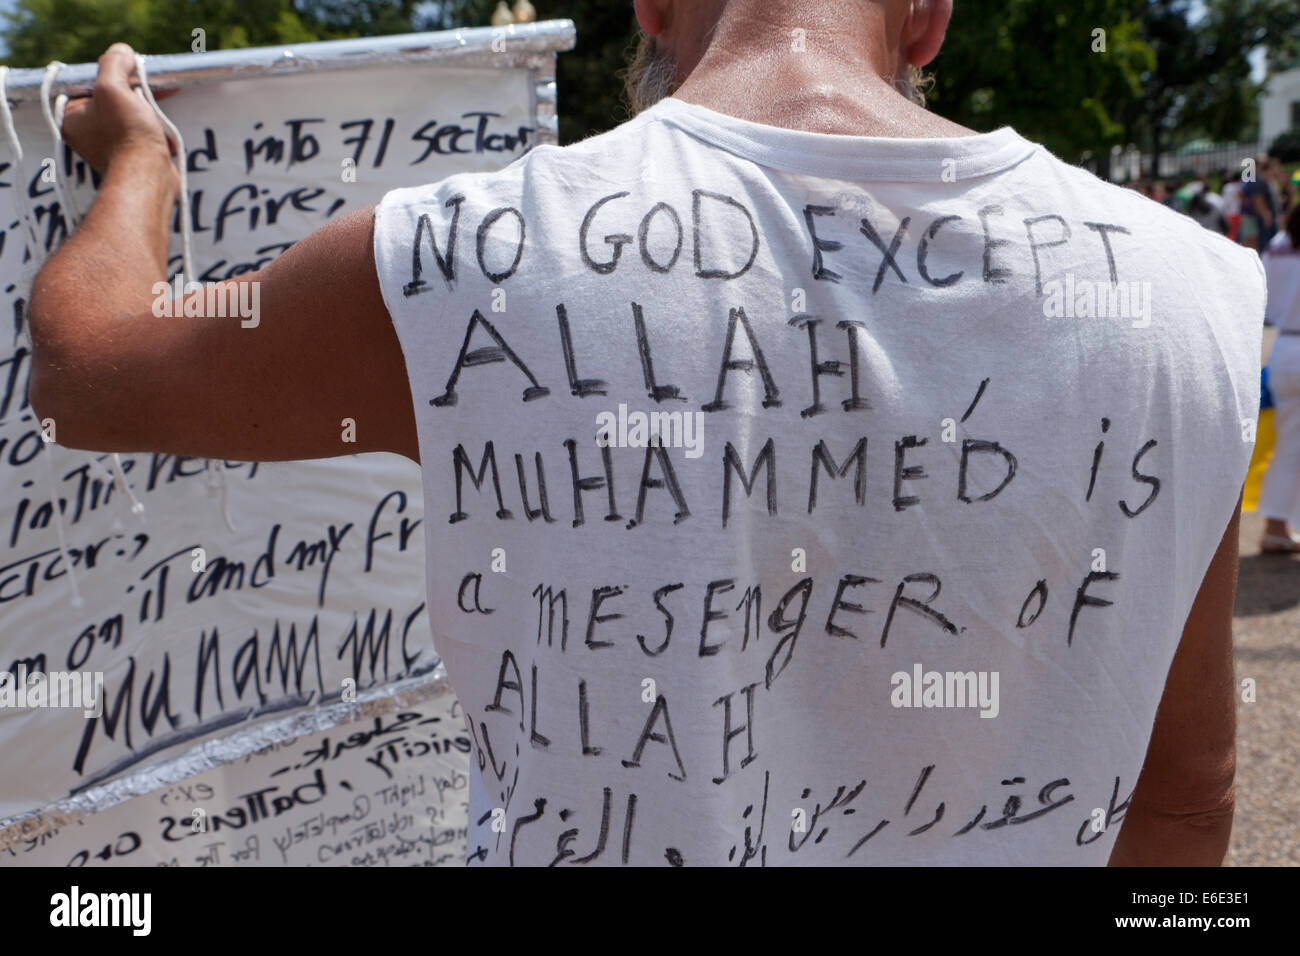 Muslim man with Islamic messages preaching in pubic - Washington, DC USA Stock Photo